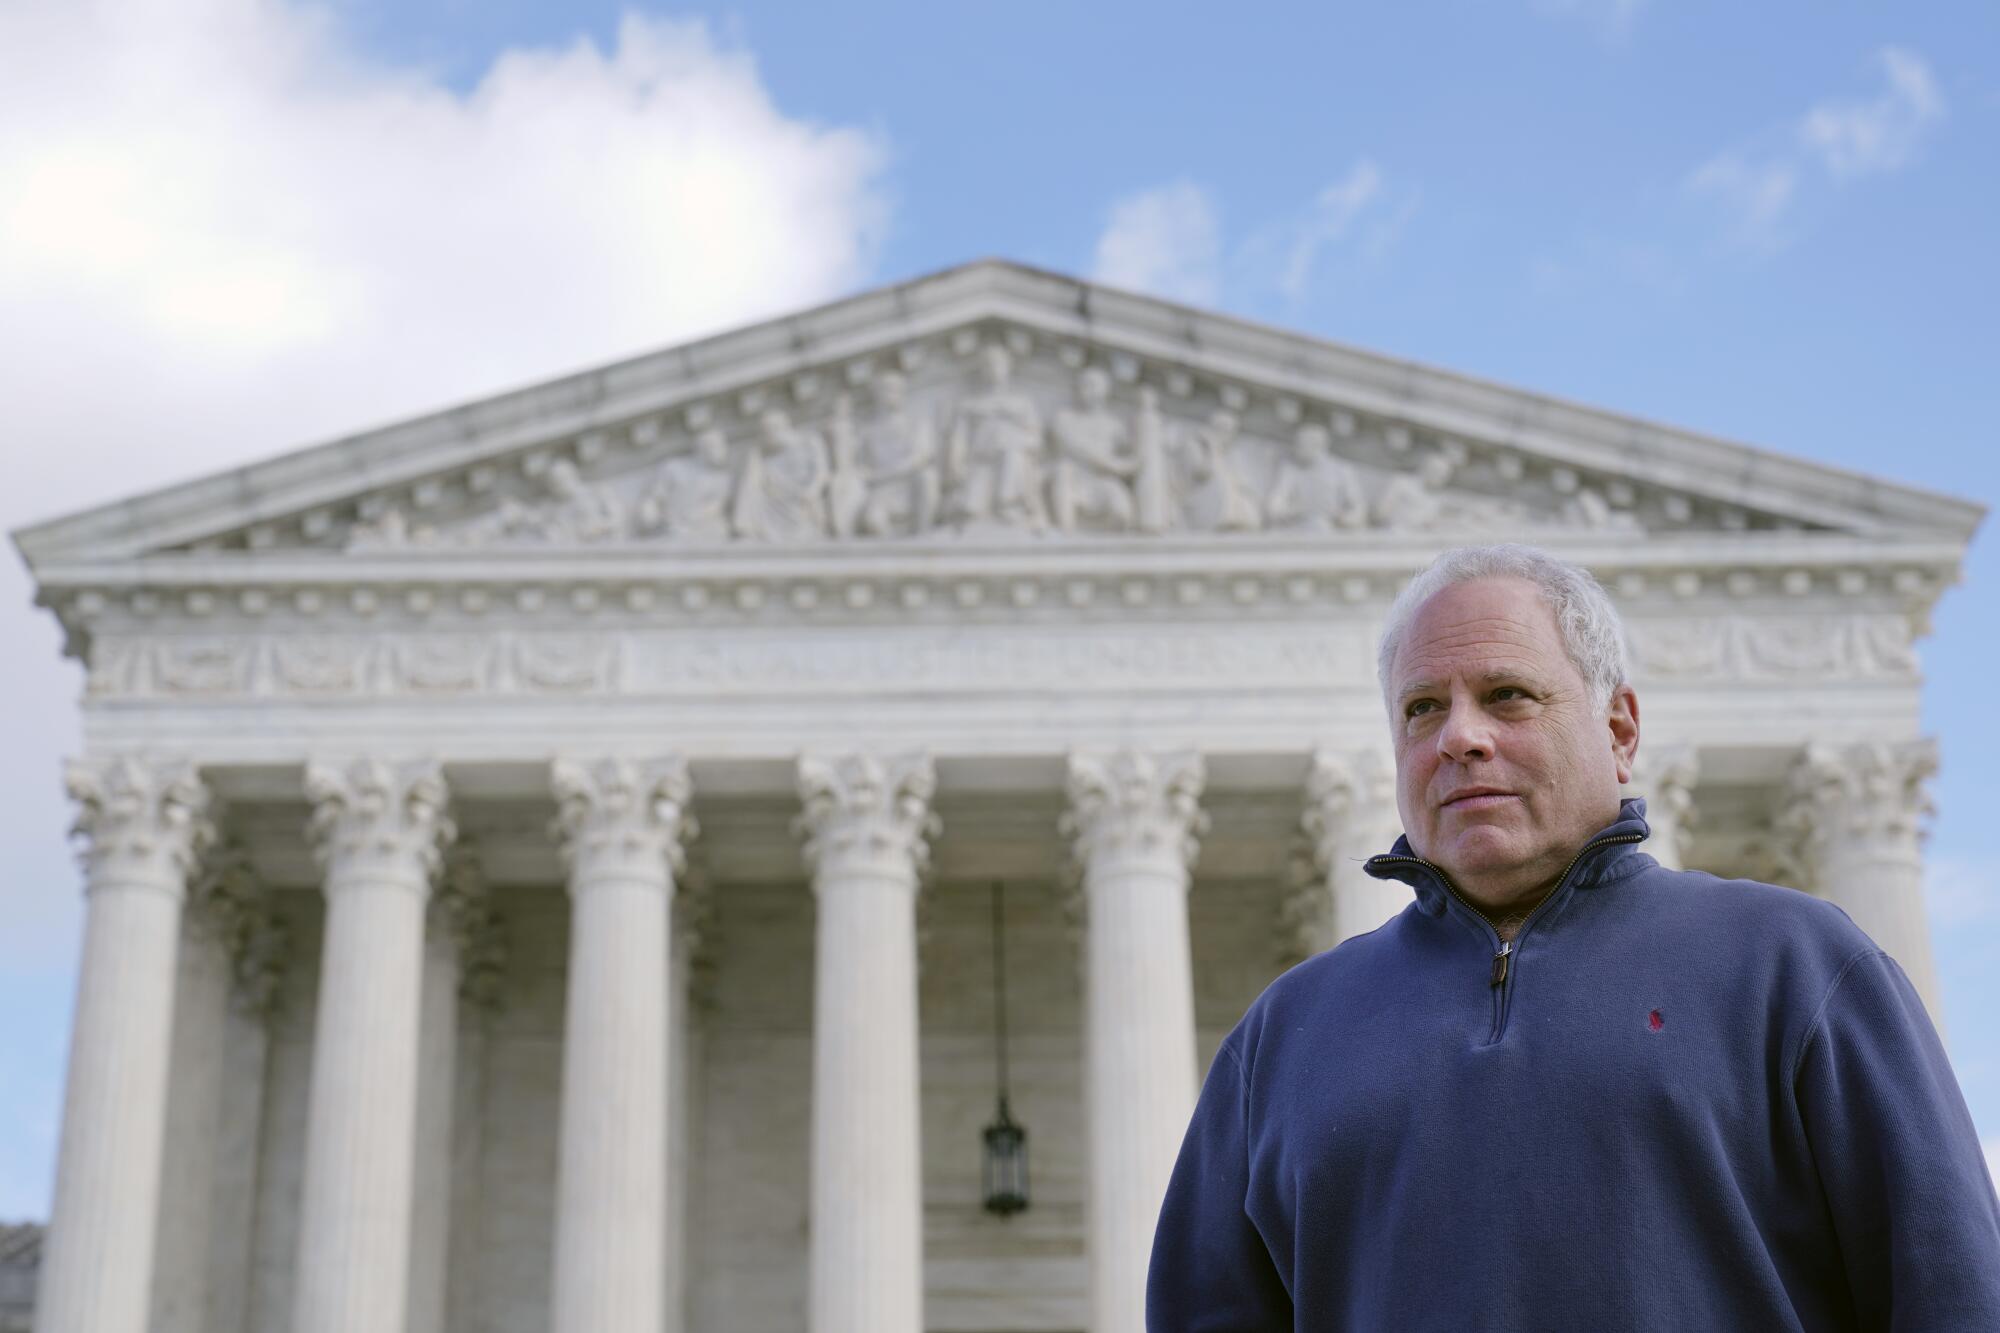 David Cassirer, the great-grandson of Lilly Cassirer, poses for a photo outside the Supreme Court in Washington